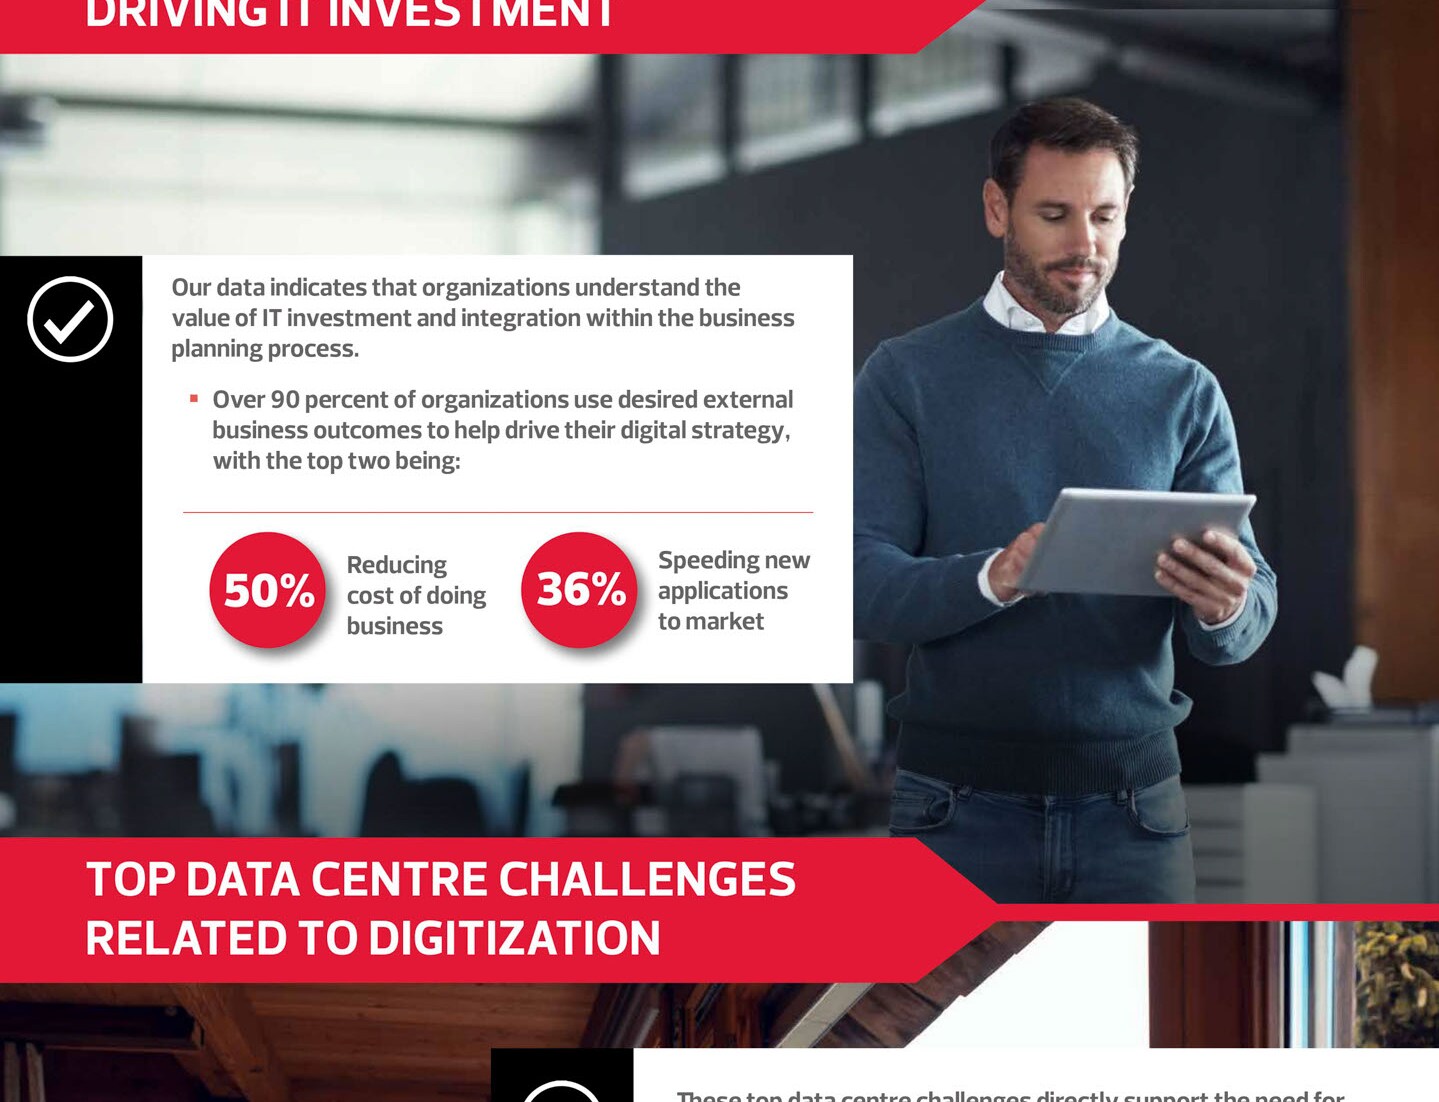 CDW Cloud Report 2022 - Infographic, Please use the PDF if this image doesn't load.